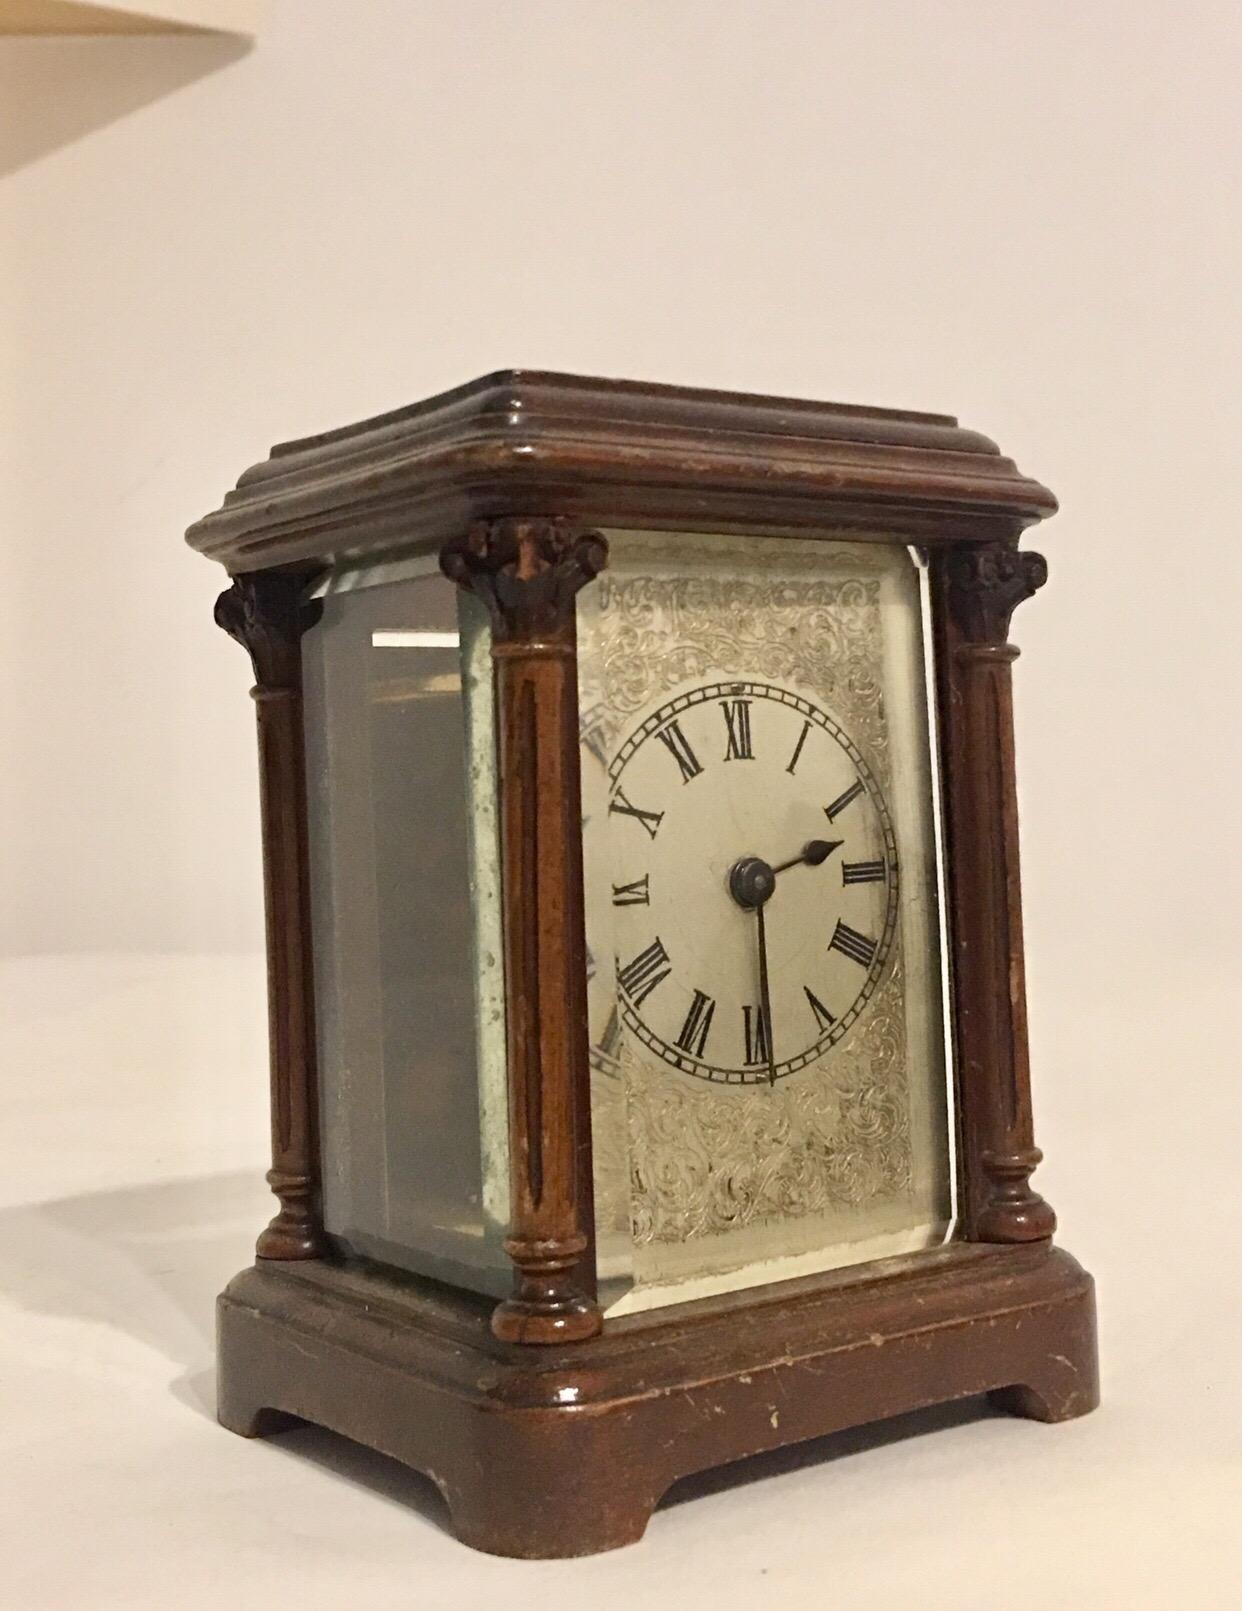 Beveled Rare Antique Timepiece Wooden Mantel / Carriage Clock For Sale